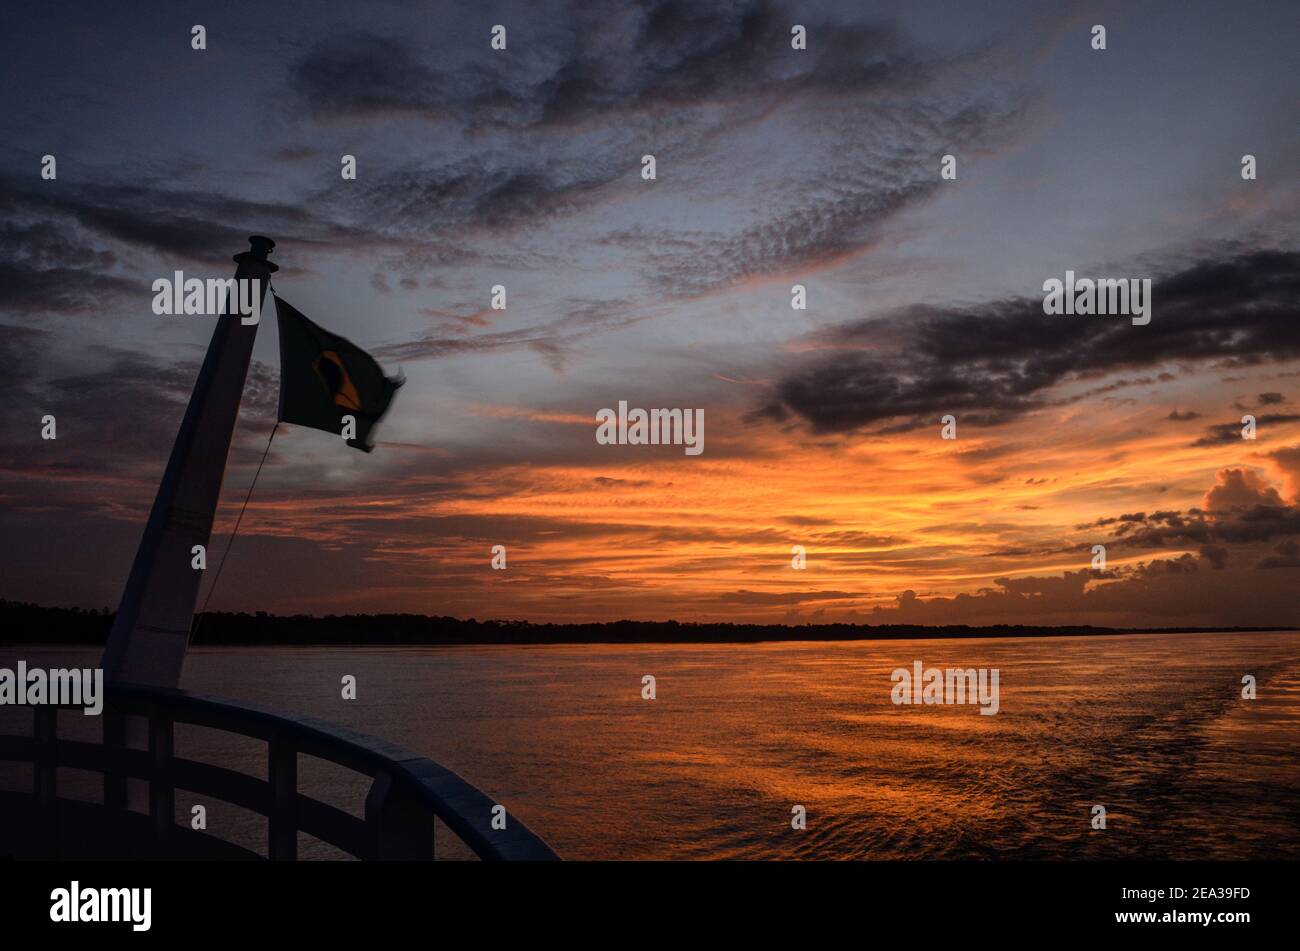 Travelling during the sunset by boat at the giant Amazon River, Brazil. Stock Photo